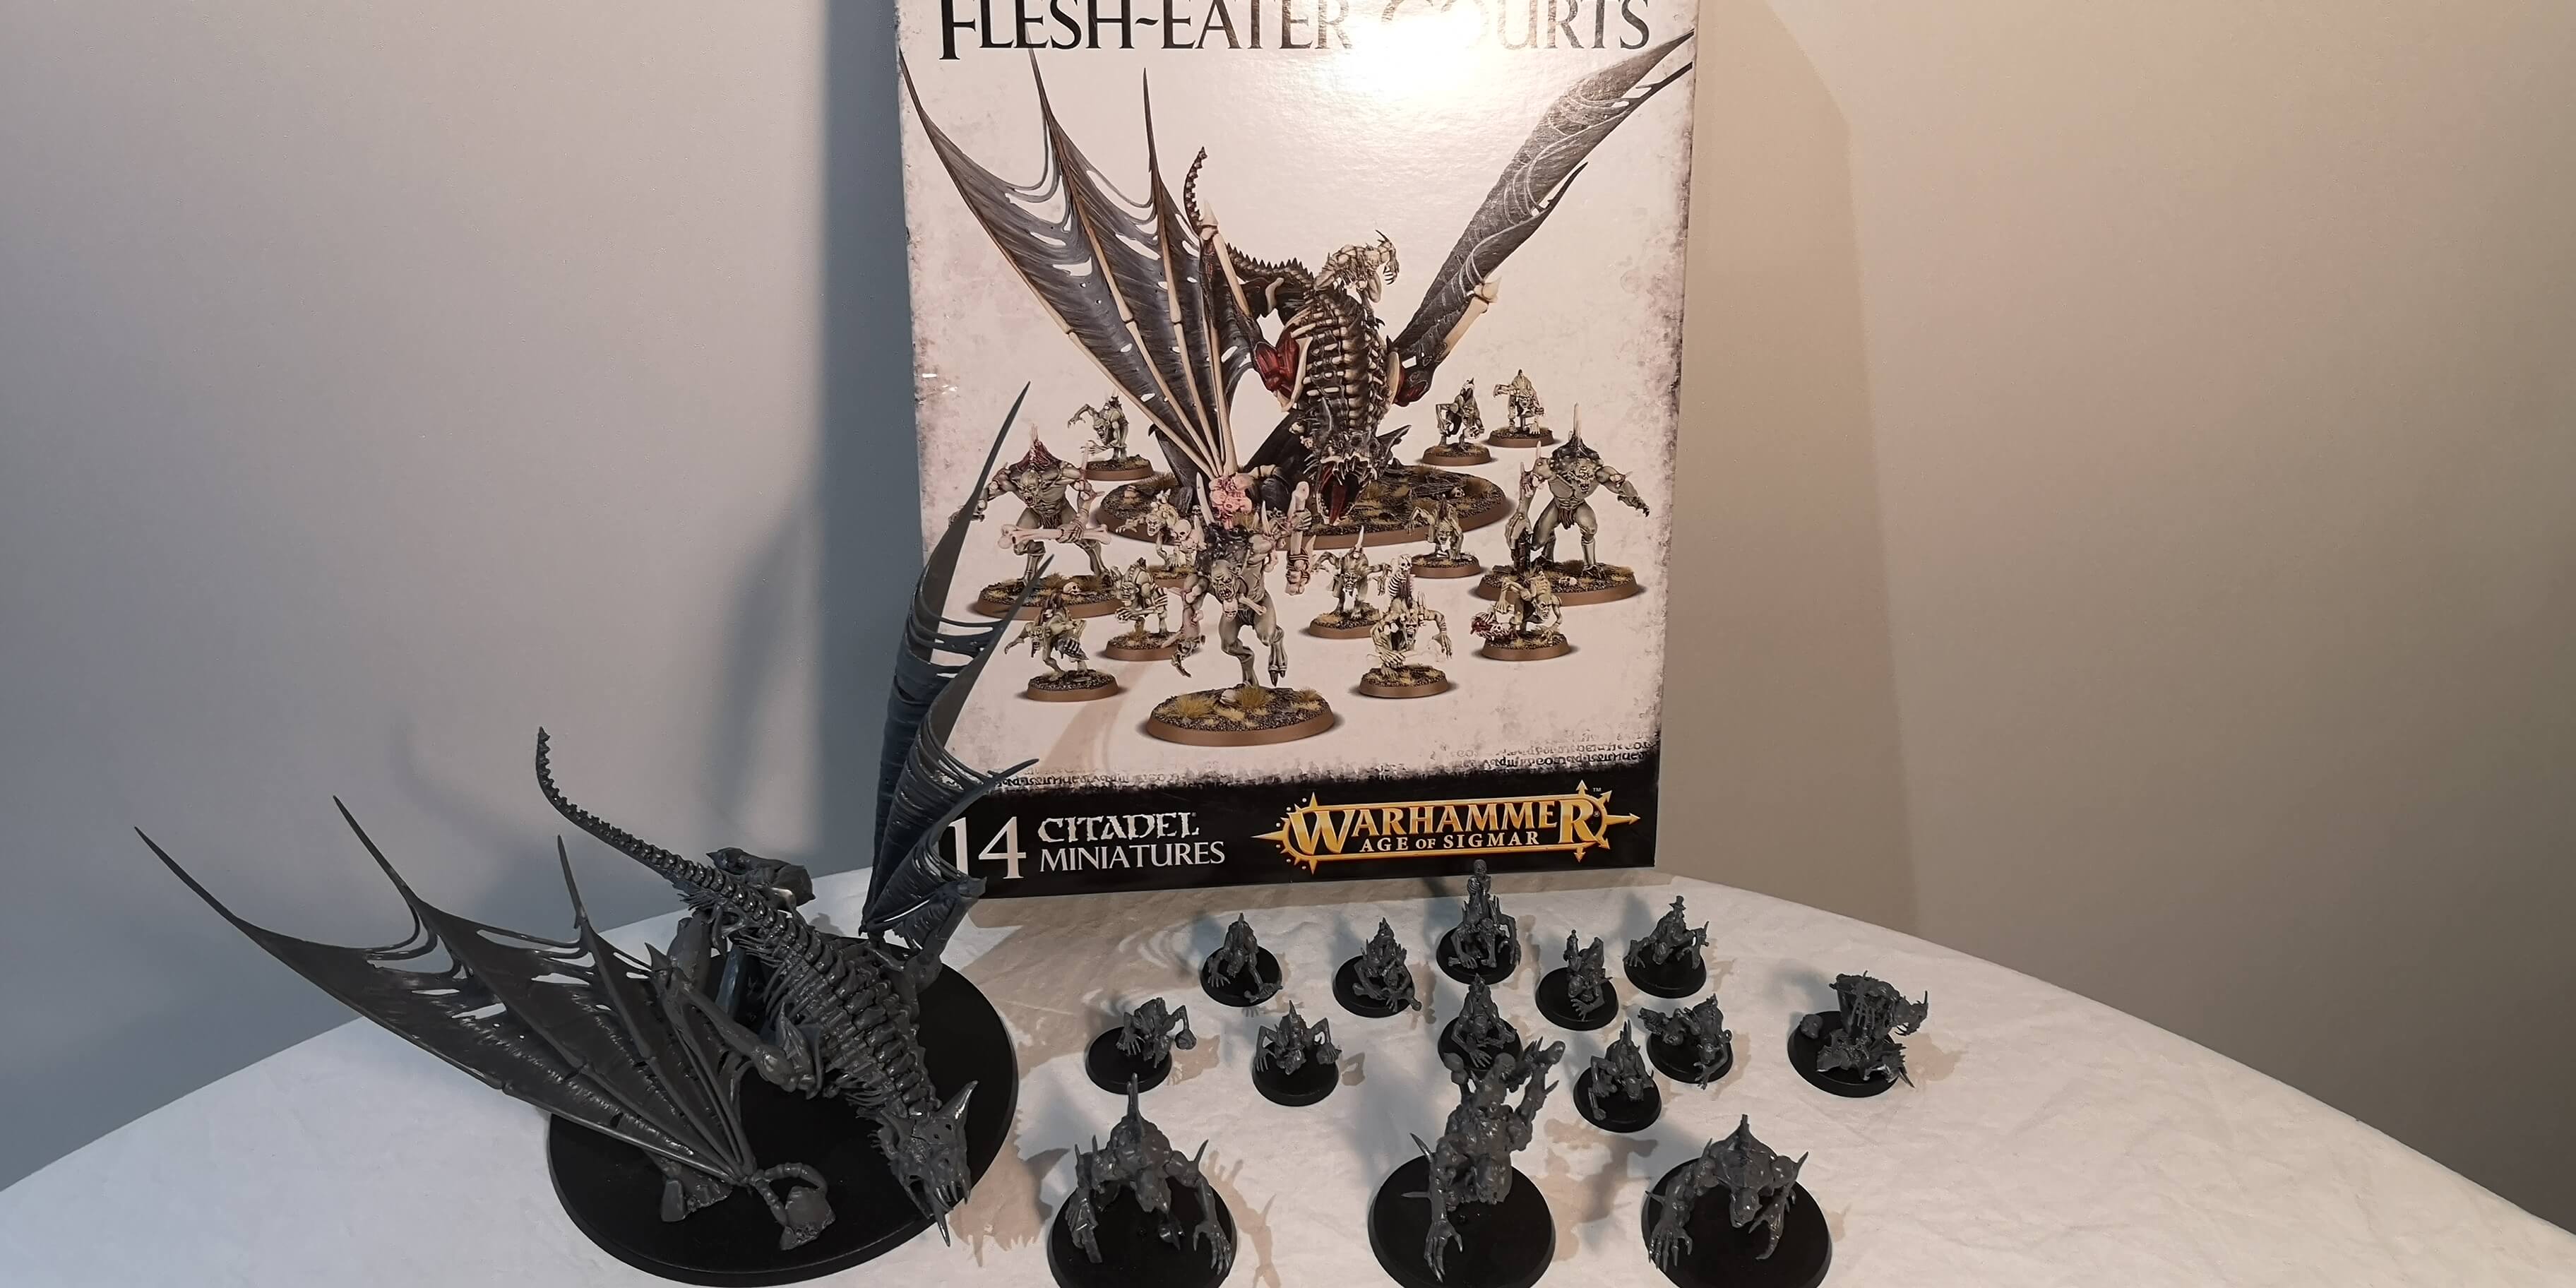 Start Collecting Flesh-eater Courts Warhammer Age of Sigmar